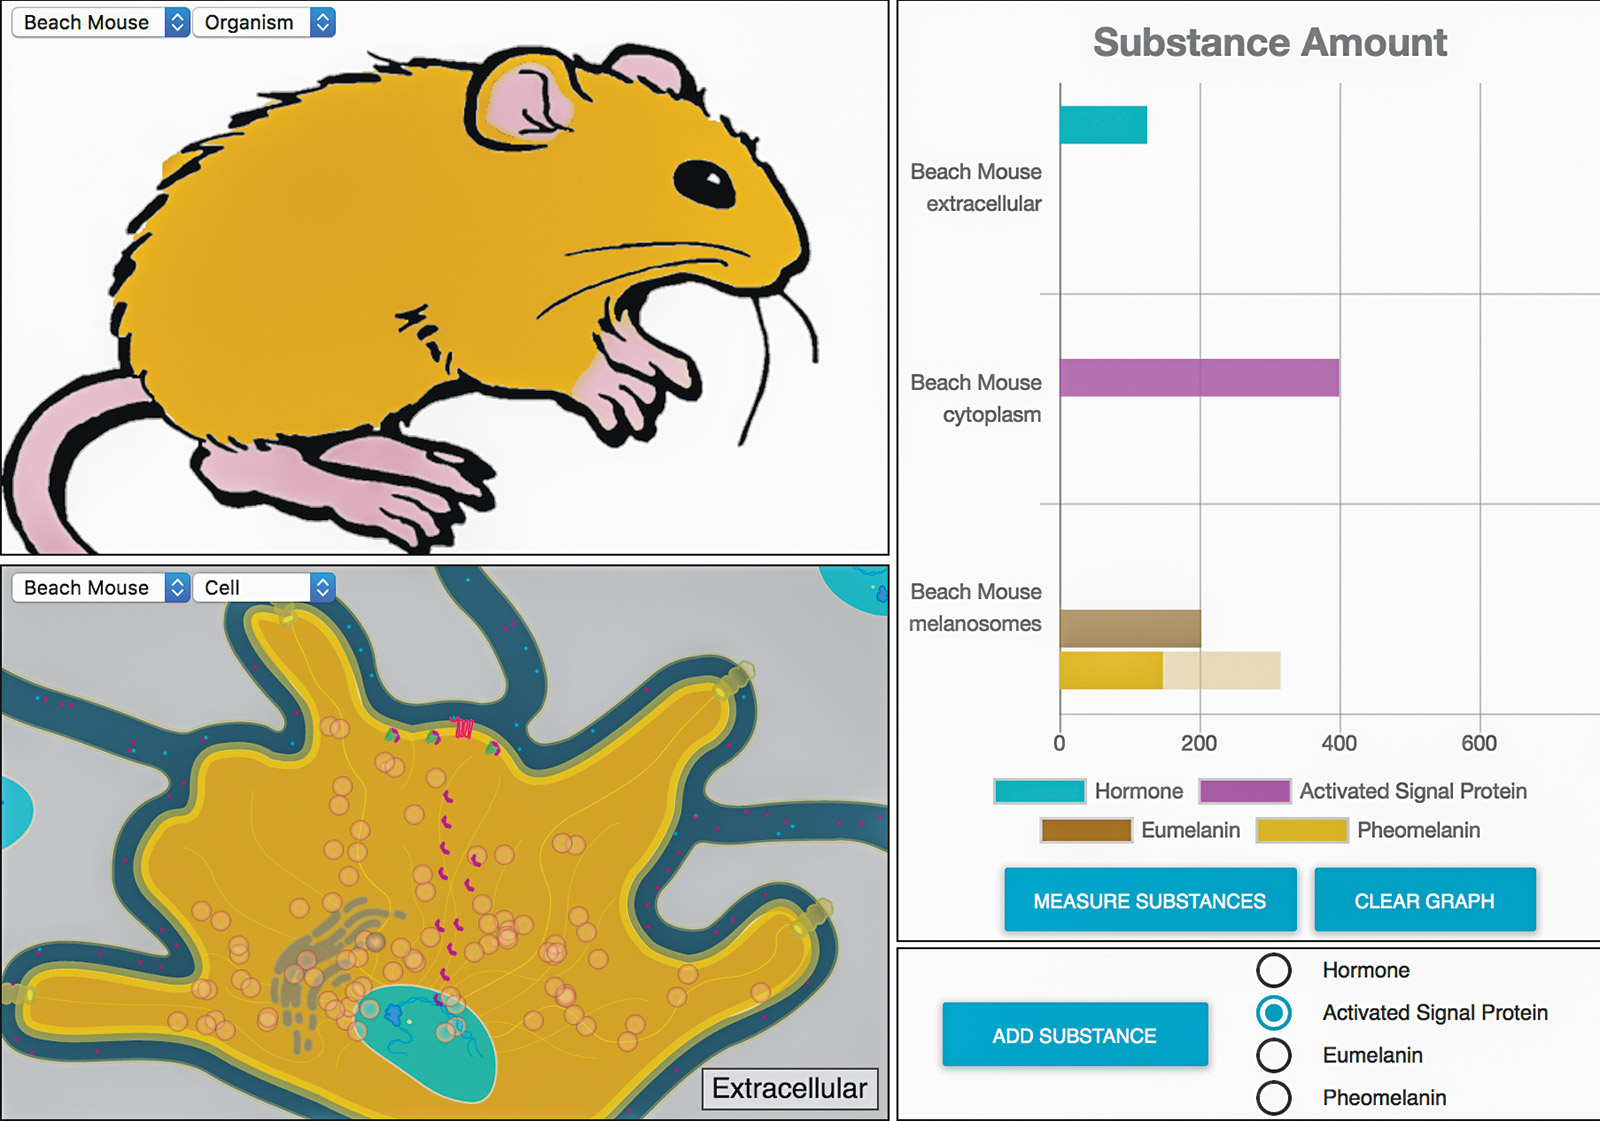 Multi-level Model view of the beach mouse showing both the organism level and the cell level.